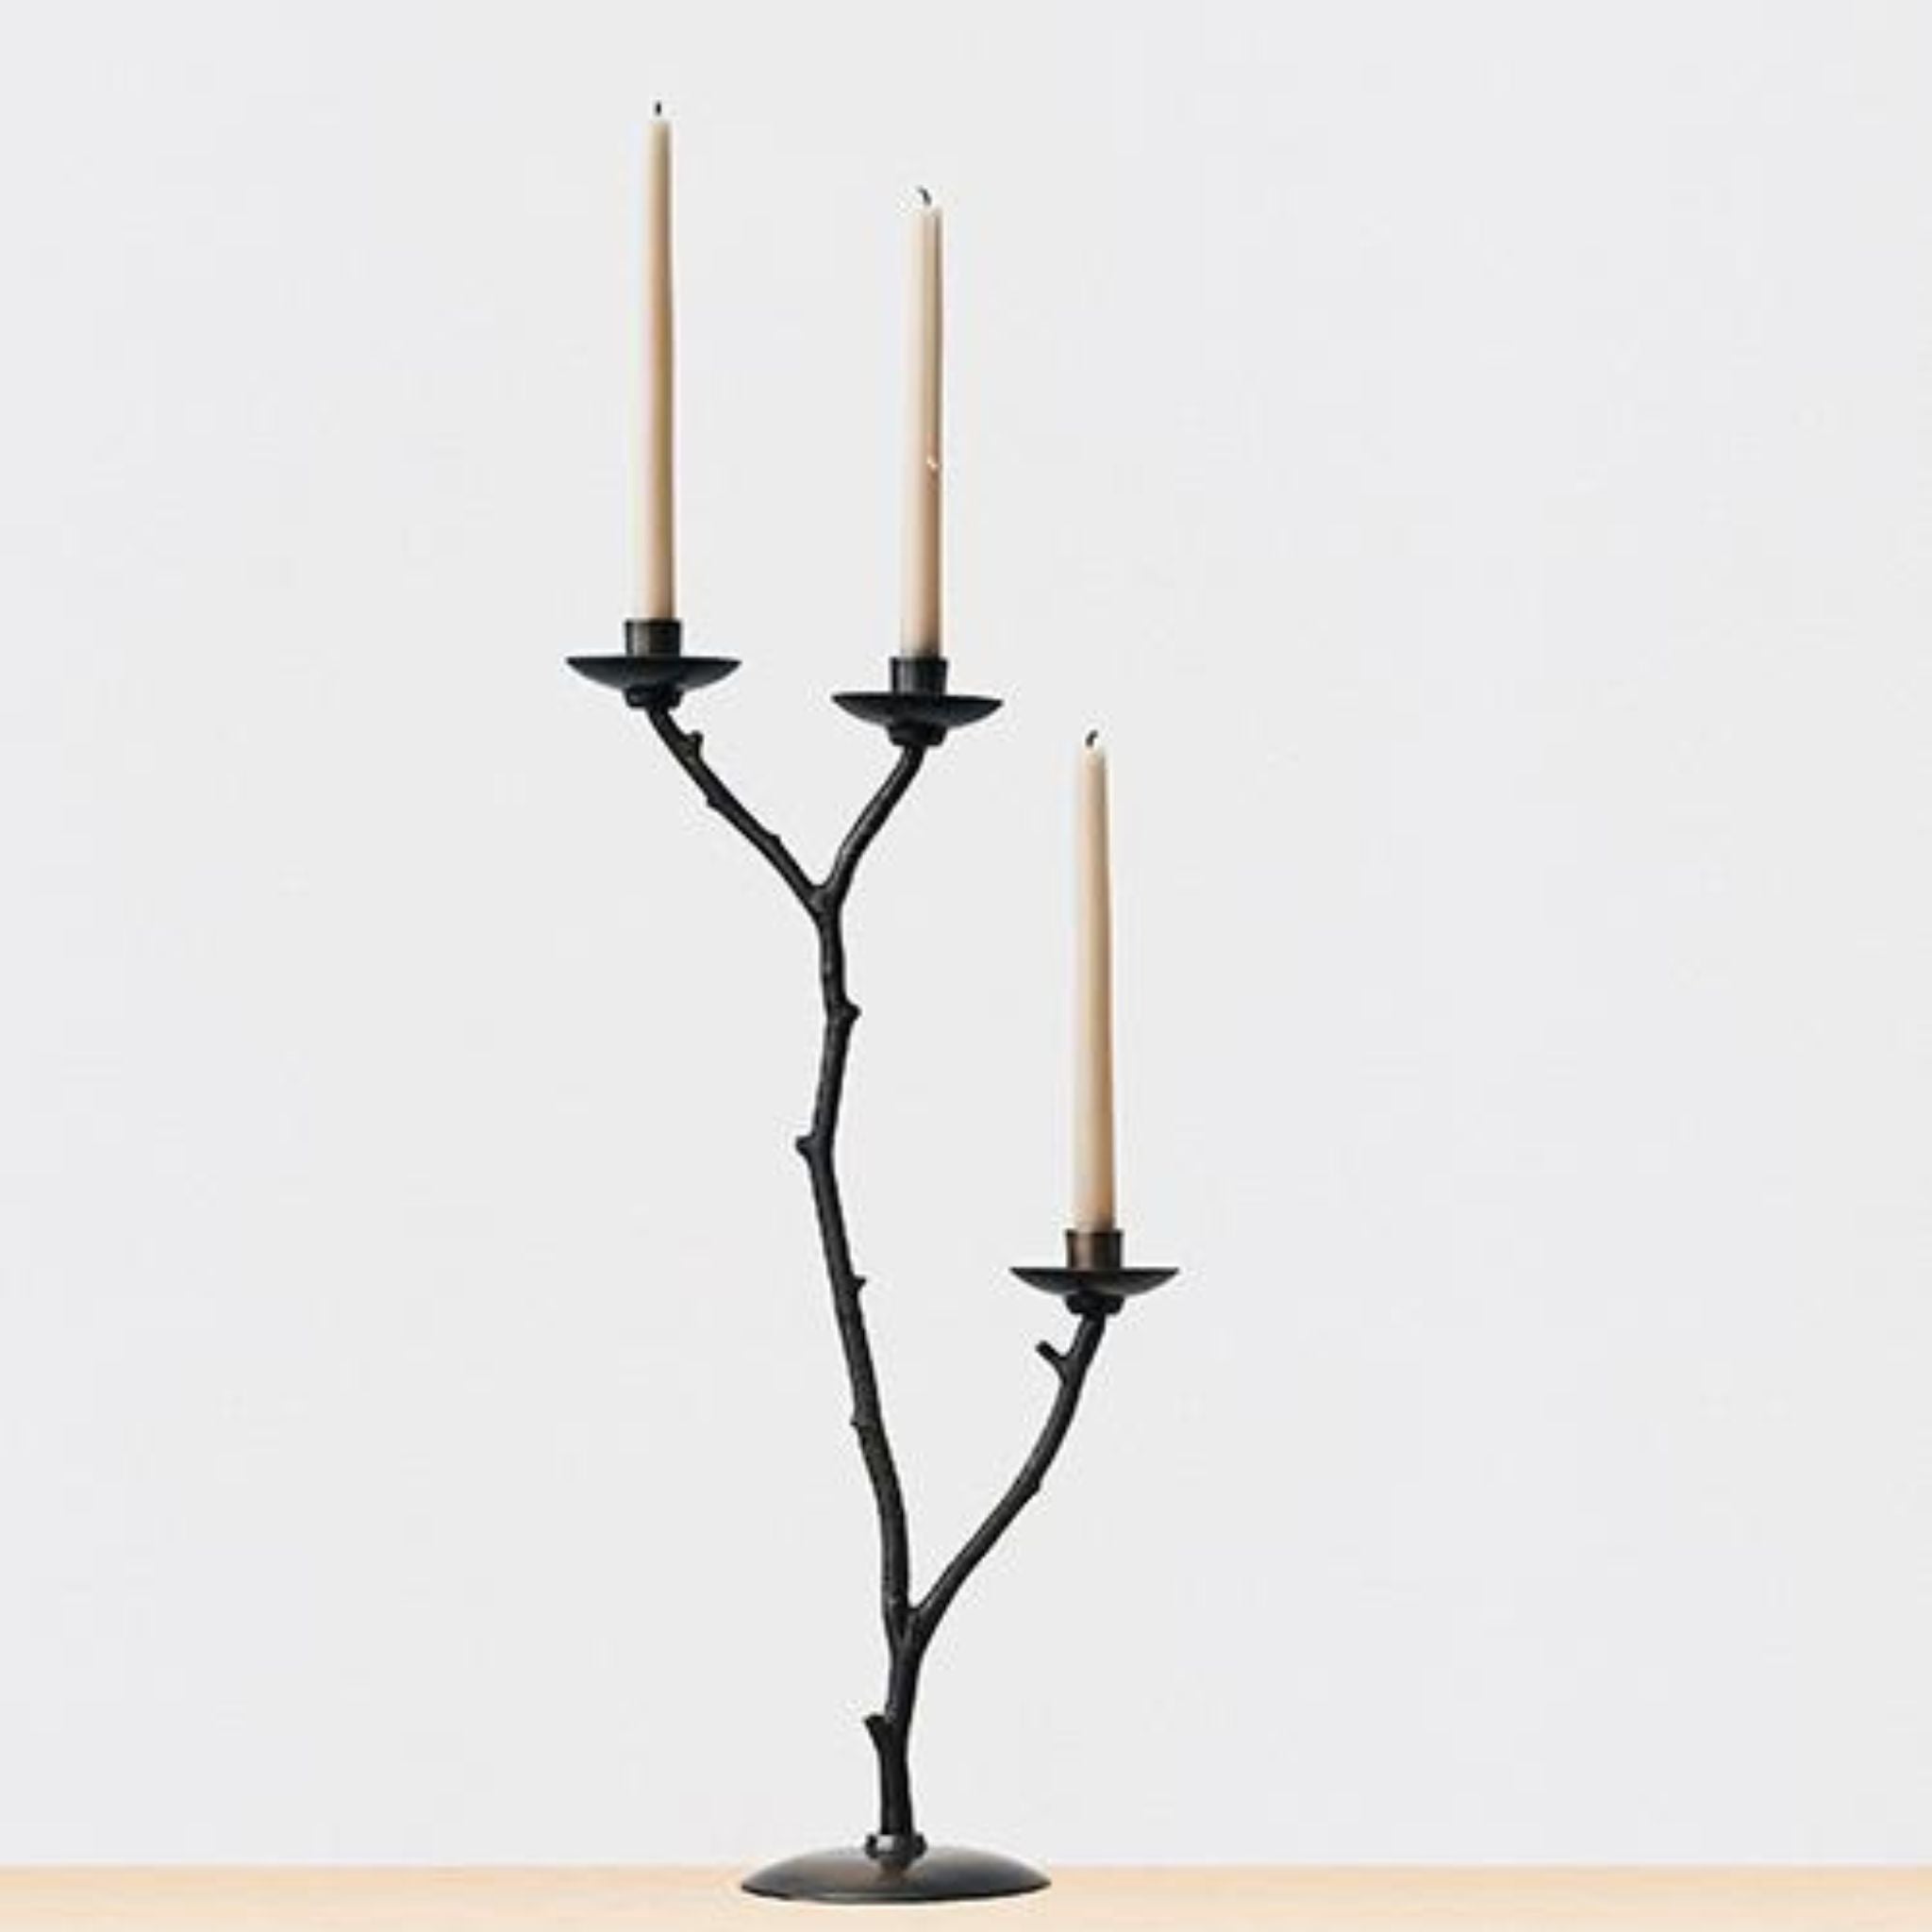 SIMPLY ELEVATED - Returning always to the natural world, candlesticks have stems based on found branches and twigs. All are distinctive shapes, purposefully selected for their individual beauty, and, for their interest together as a sculptural set.